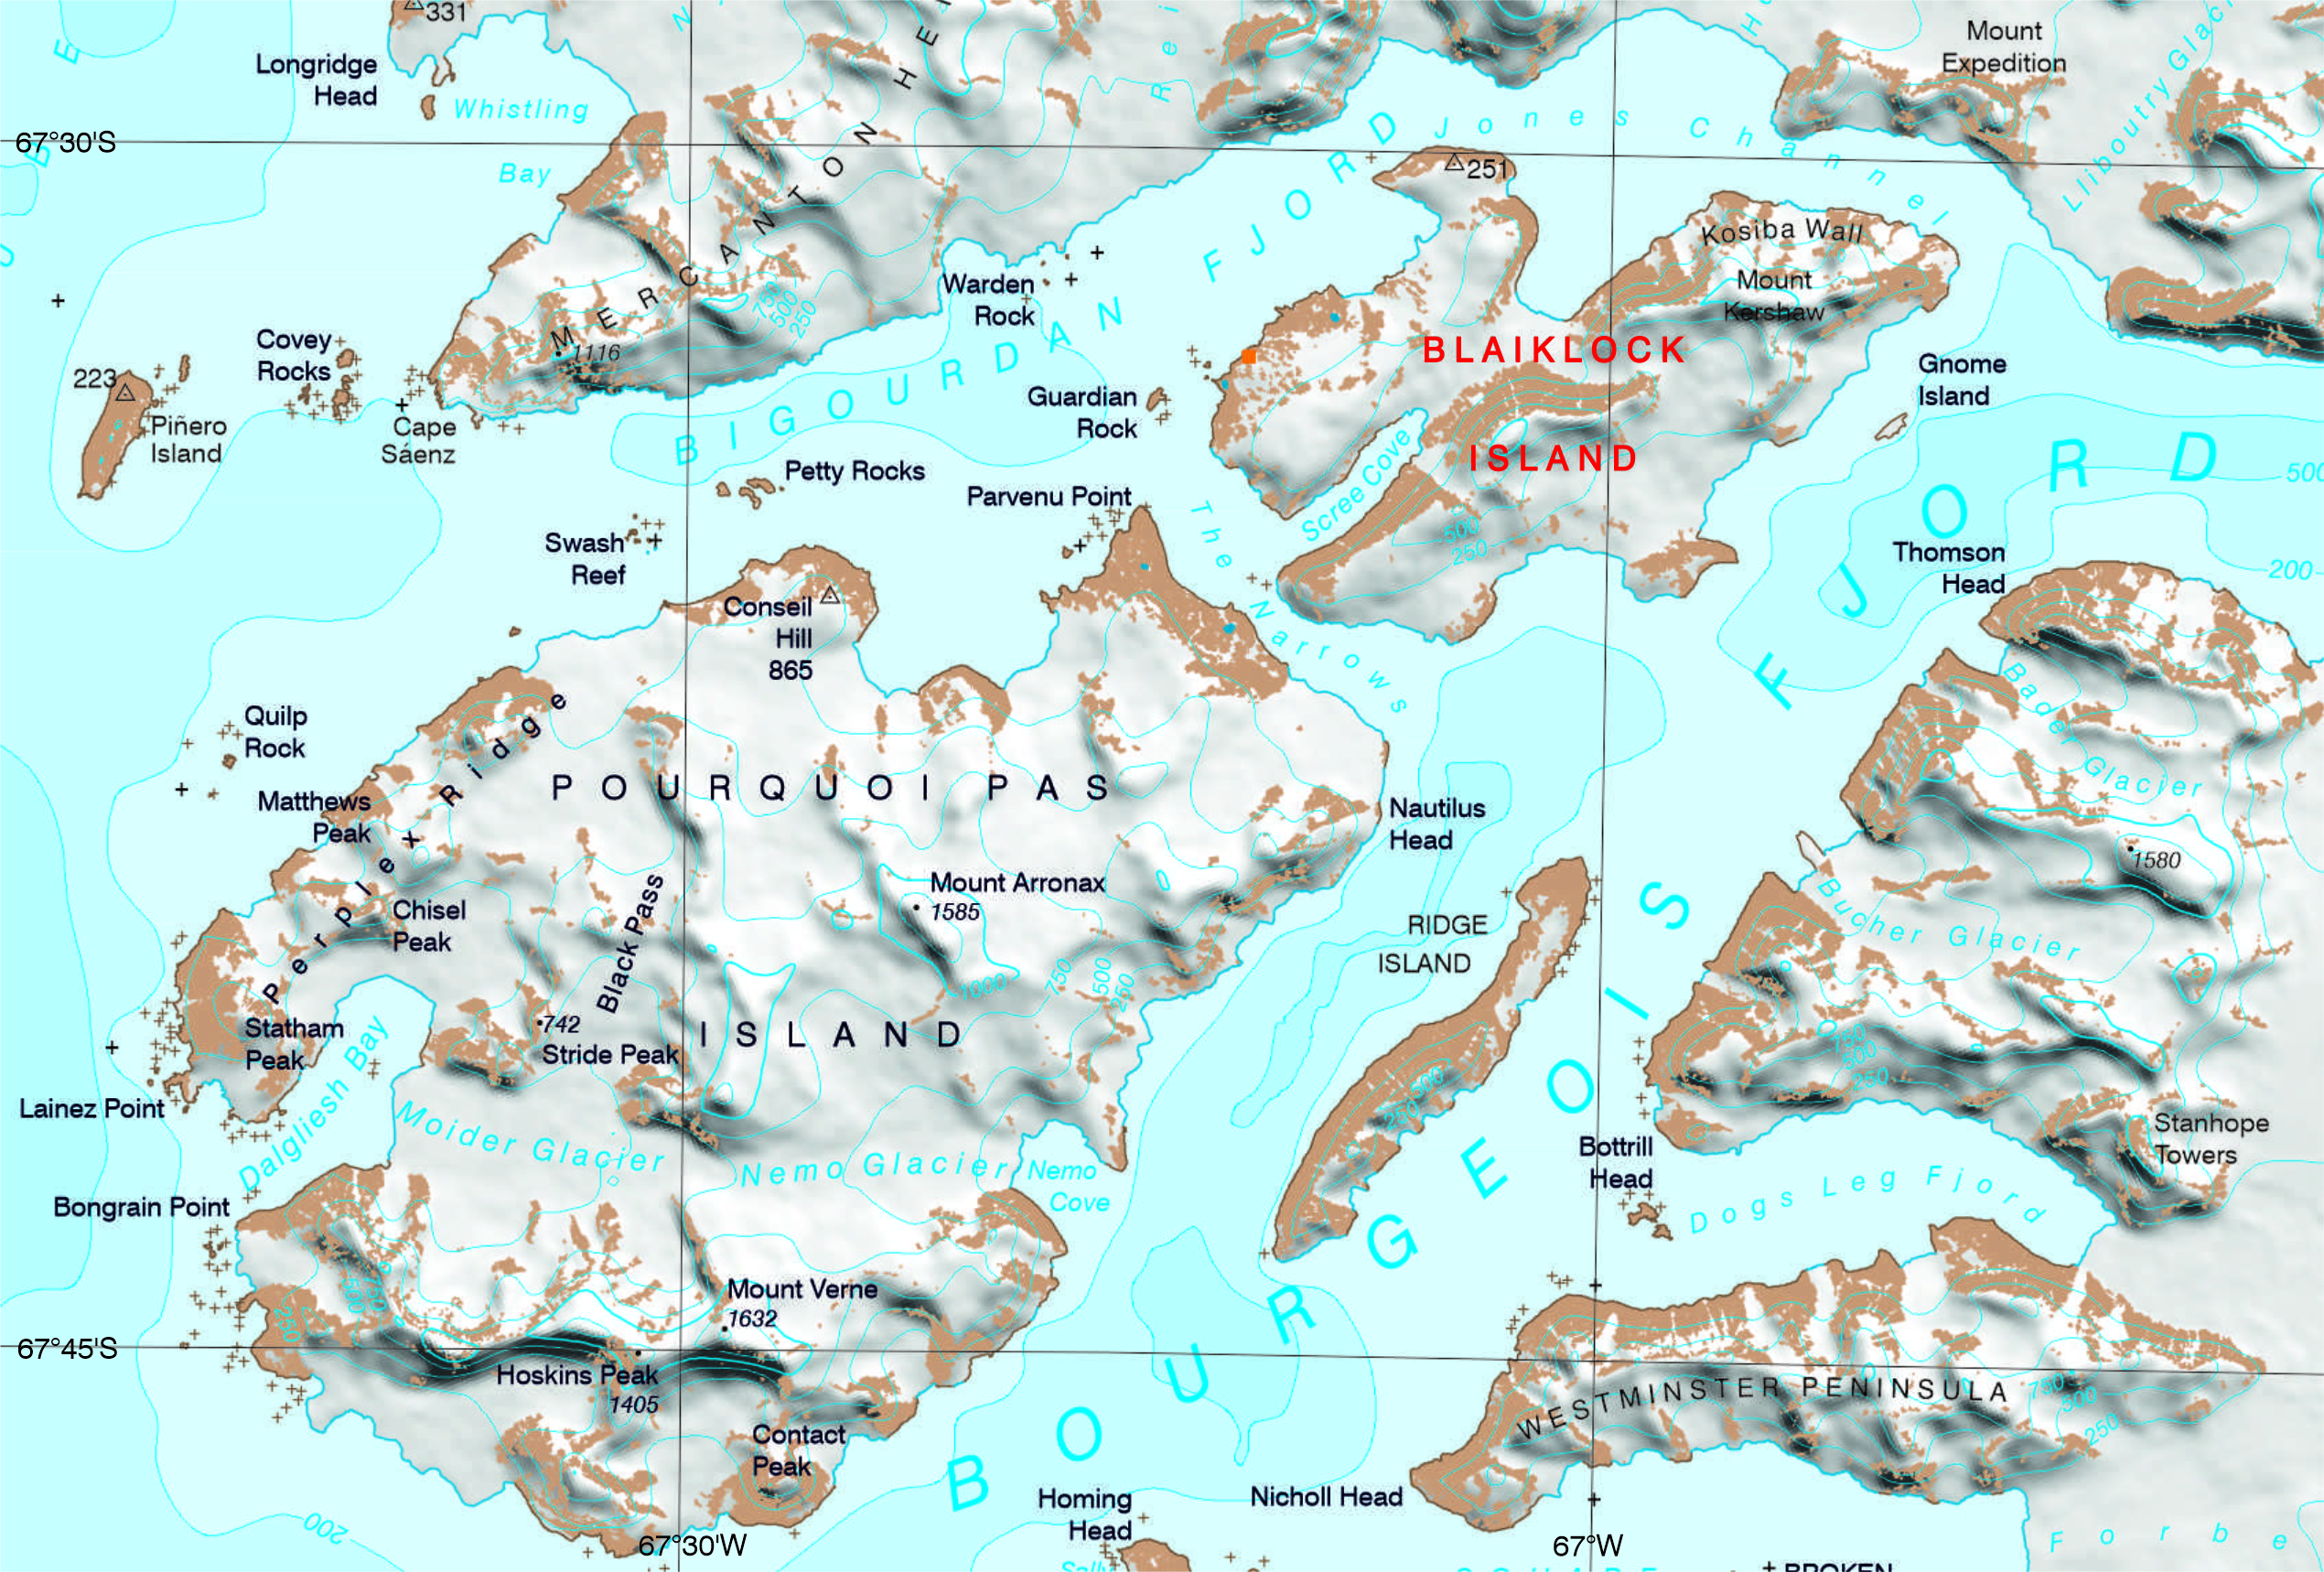 Extract from BAS 1:250,000 scale map, Adelaide Island and Arrowsmith Peninsula.